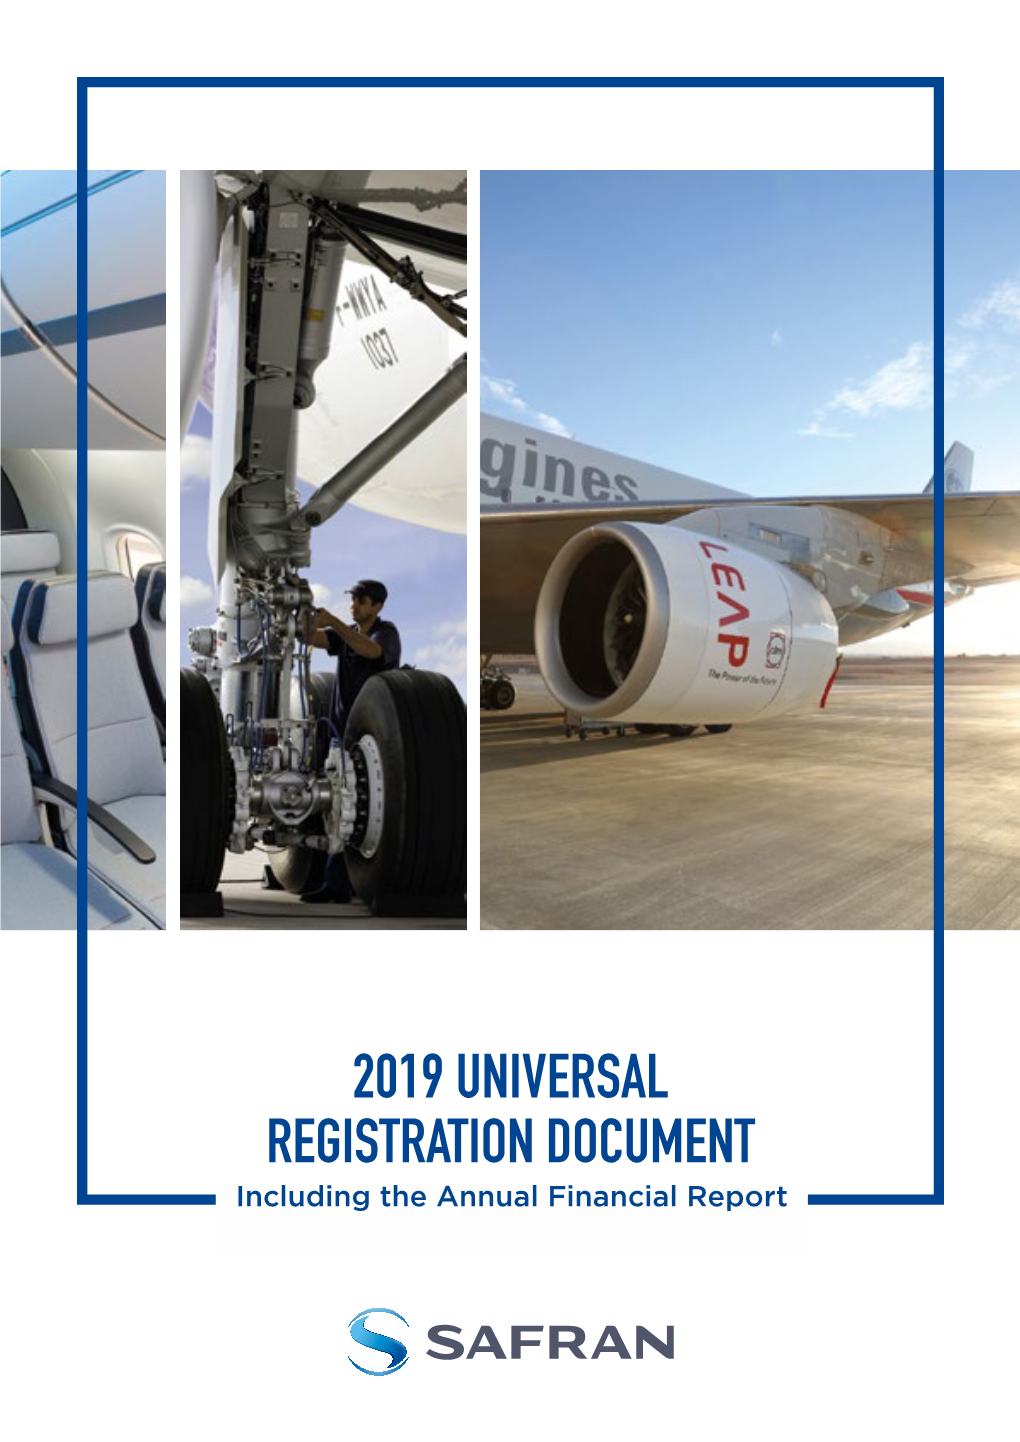 2019 UNIVERSAL REGISTRATION DOCUMENT Including the Annual Financial Report CONTENTS